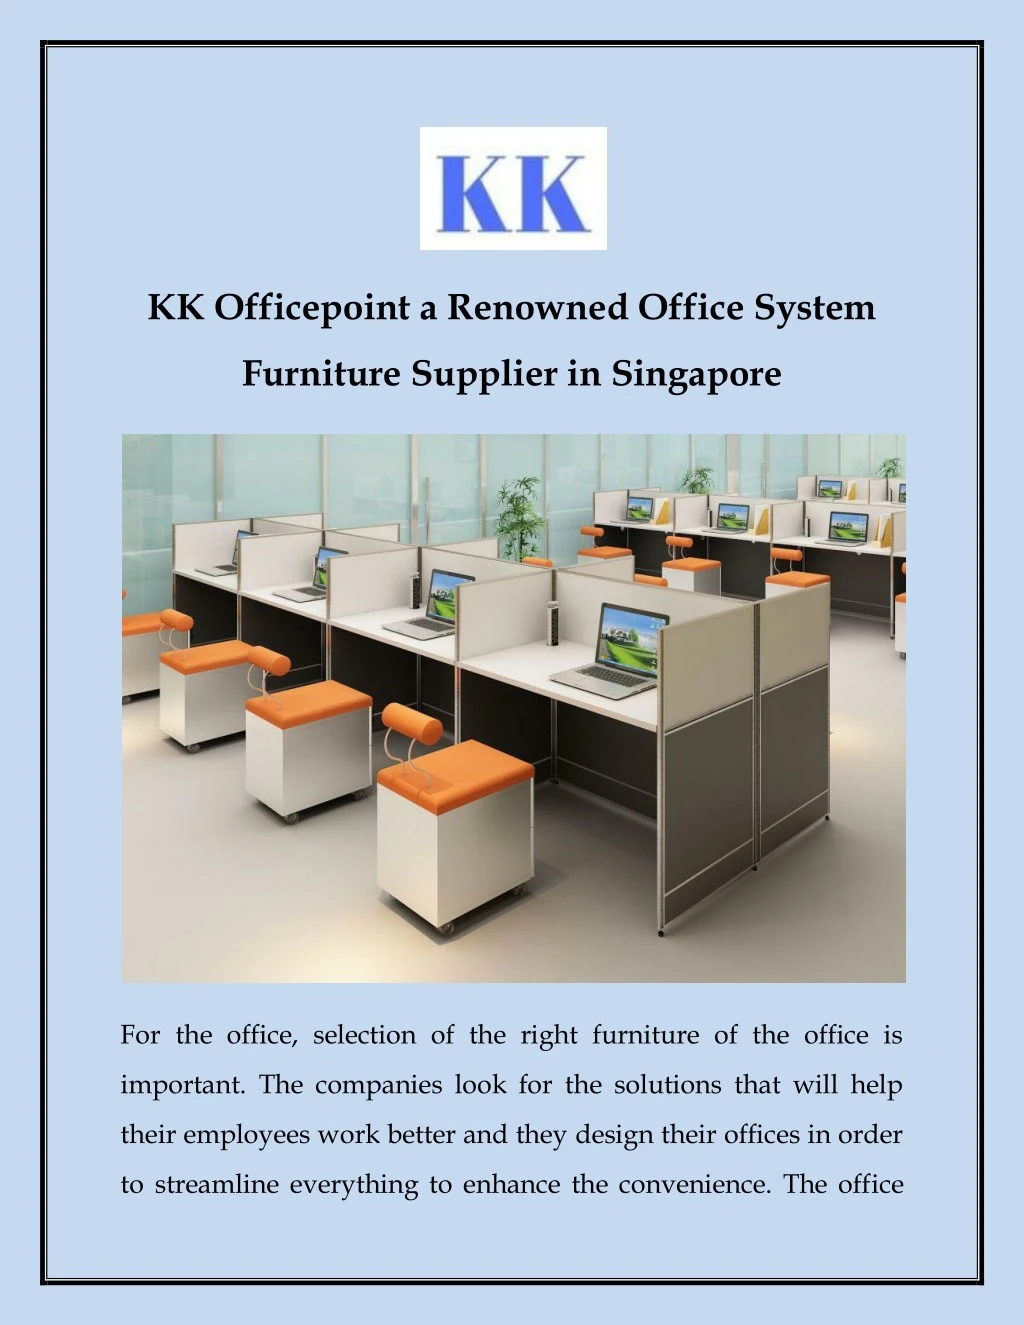 kk officepoint a renowned office system